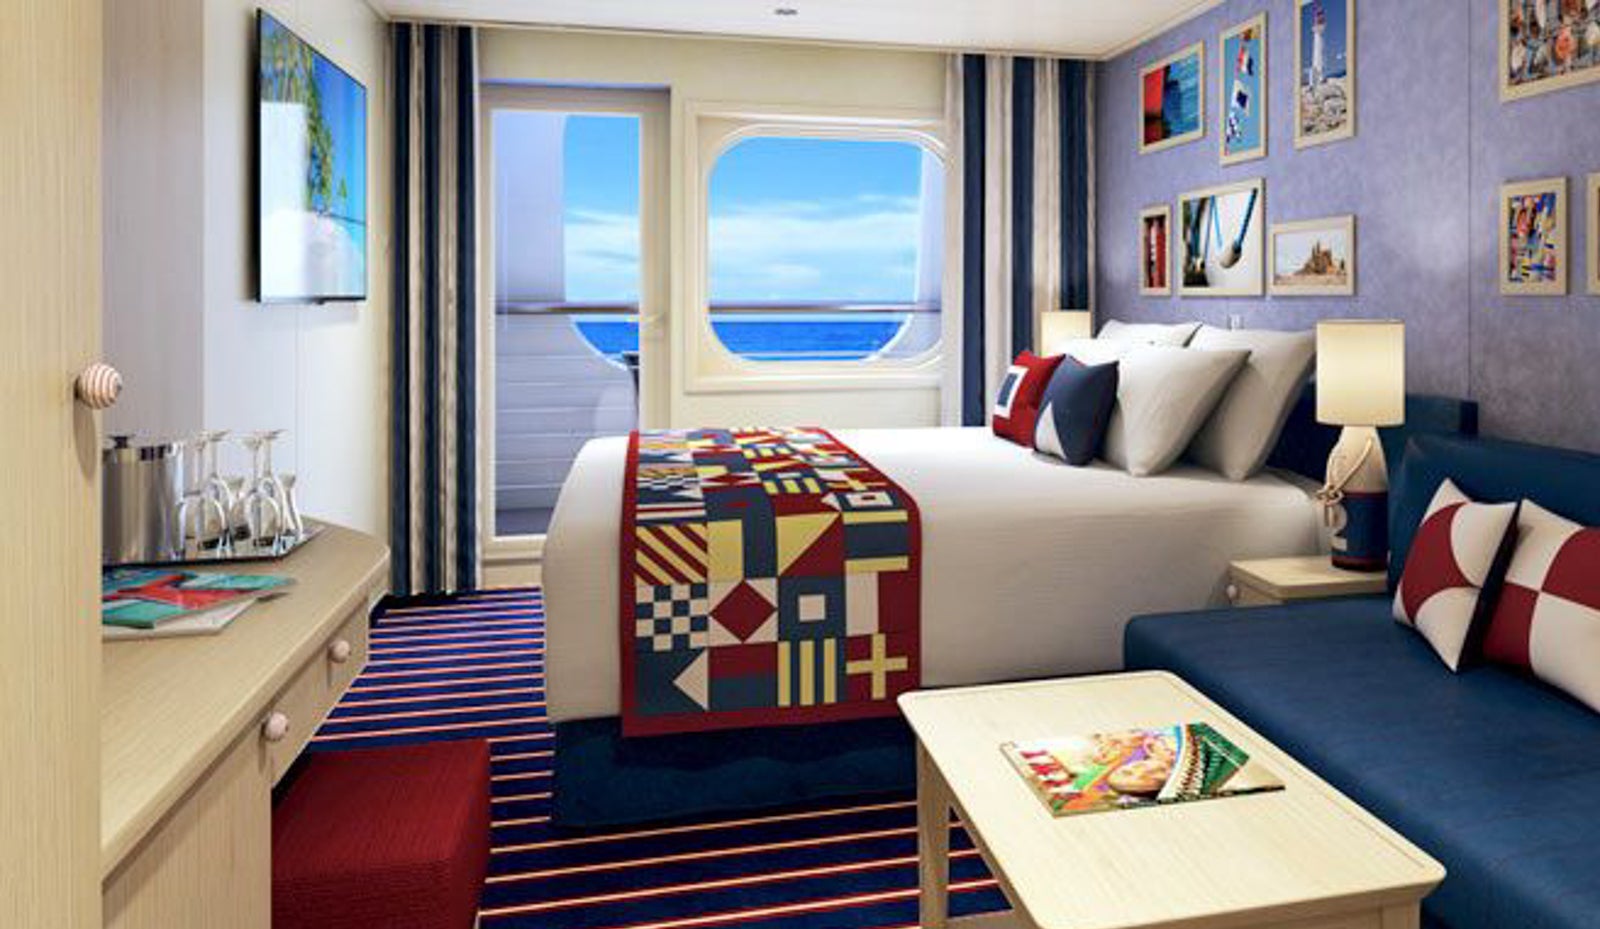 Suites On Carnival Cruise Line Ships, Carnival Cruise Bunk Bed Rooms